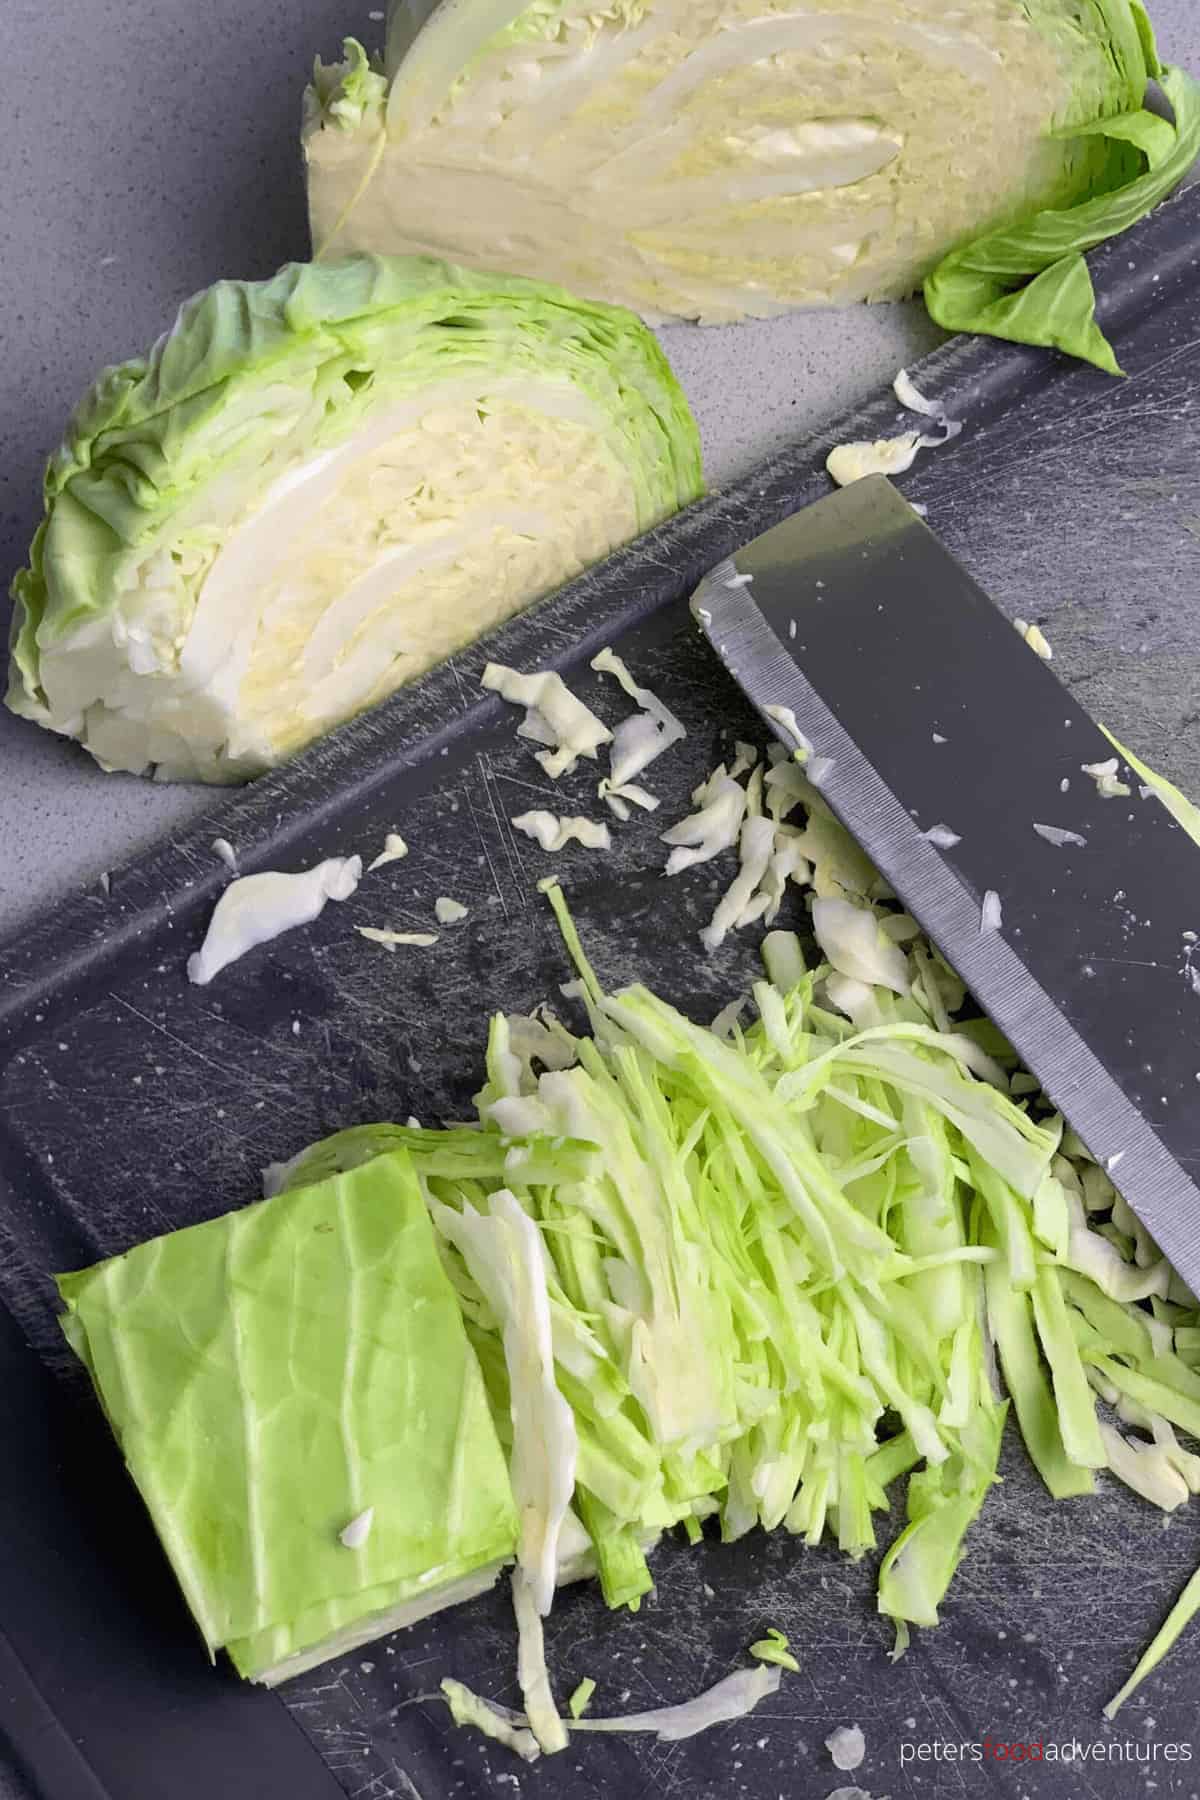 slicing cabbage for pickling cabbage